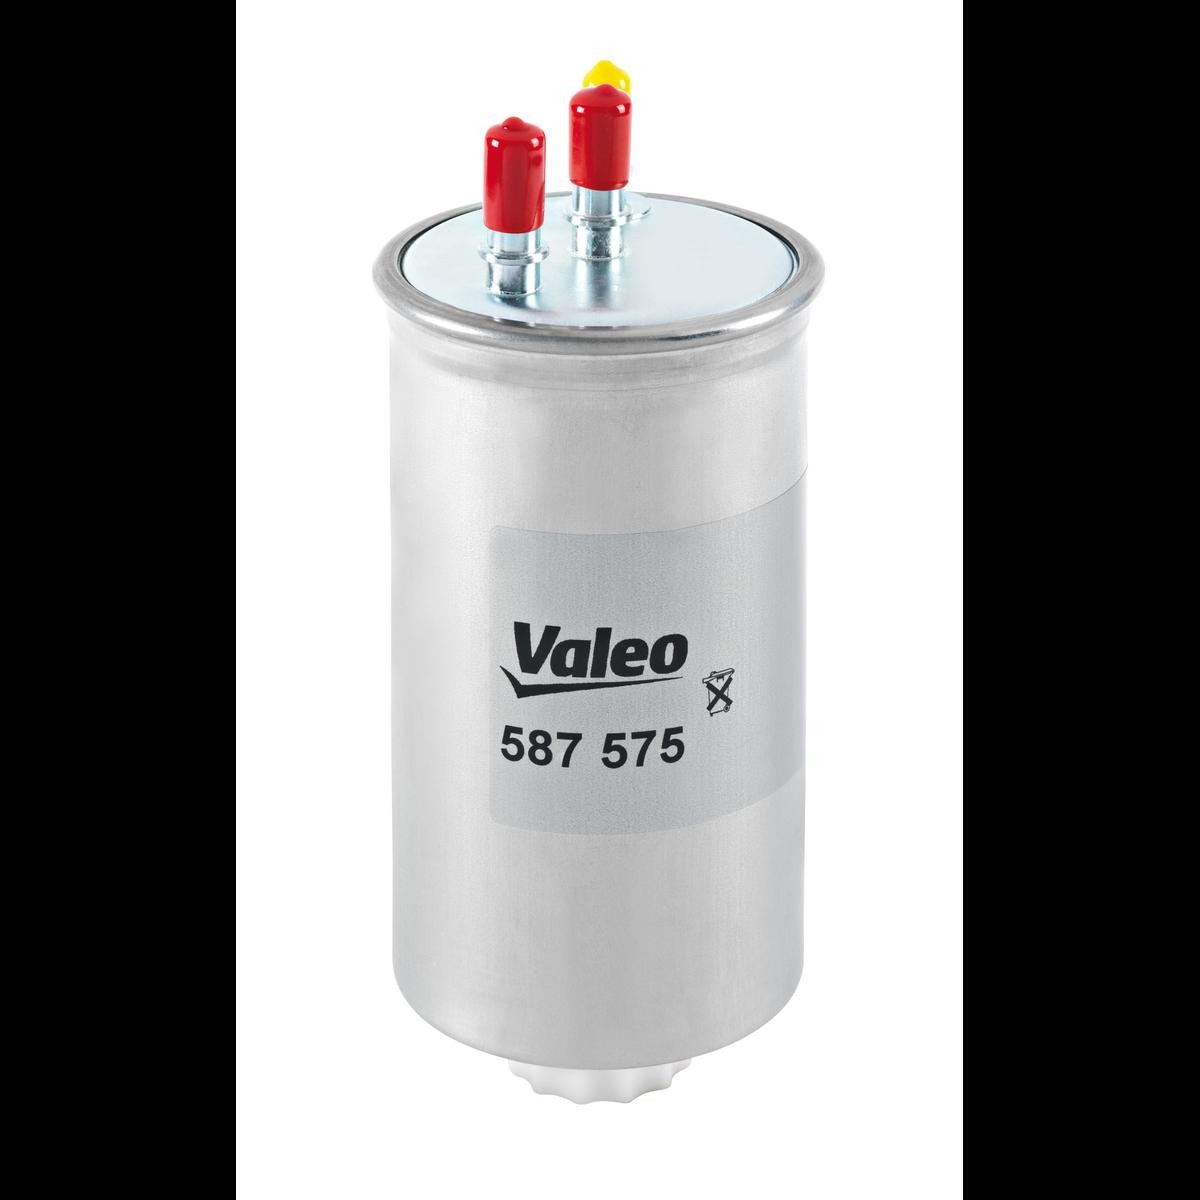 VALEO 587575 Fuel filter DACIA experience and price